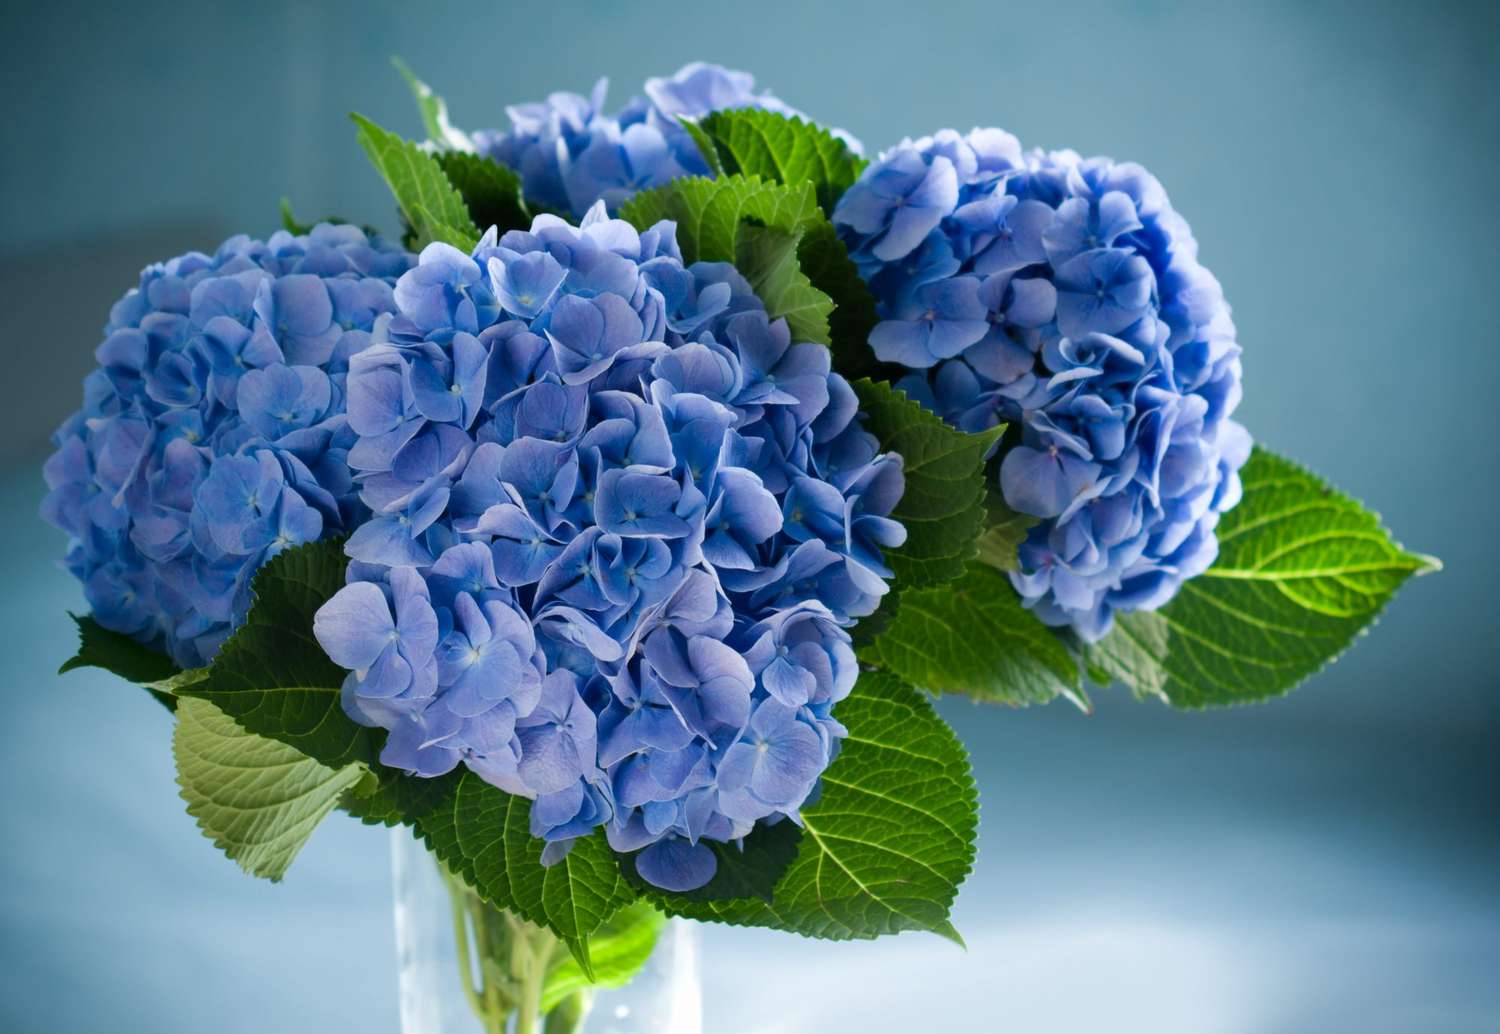 Bringing Summer Indoors: A Guide to Cutting Hydrangeas for Vase缩略图